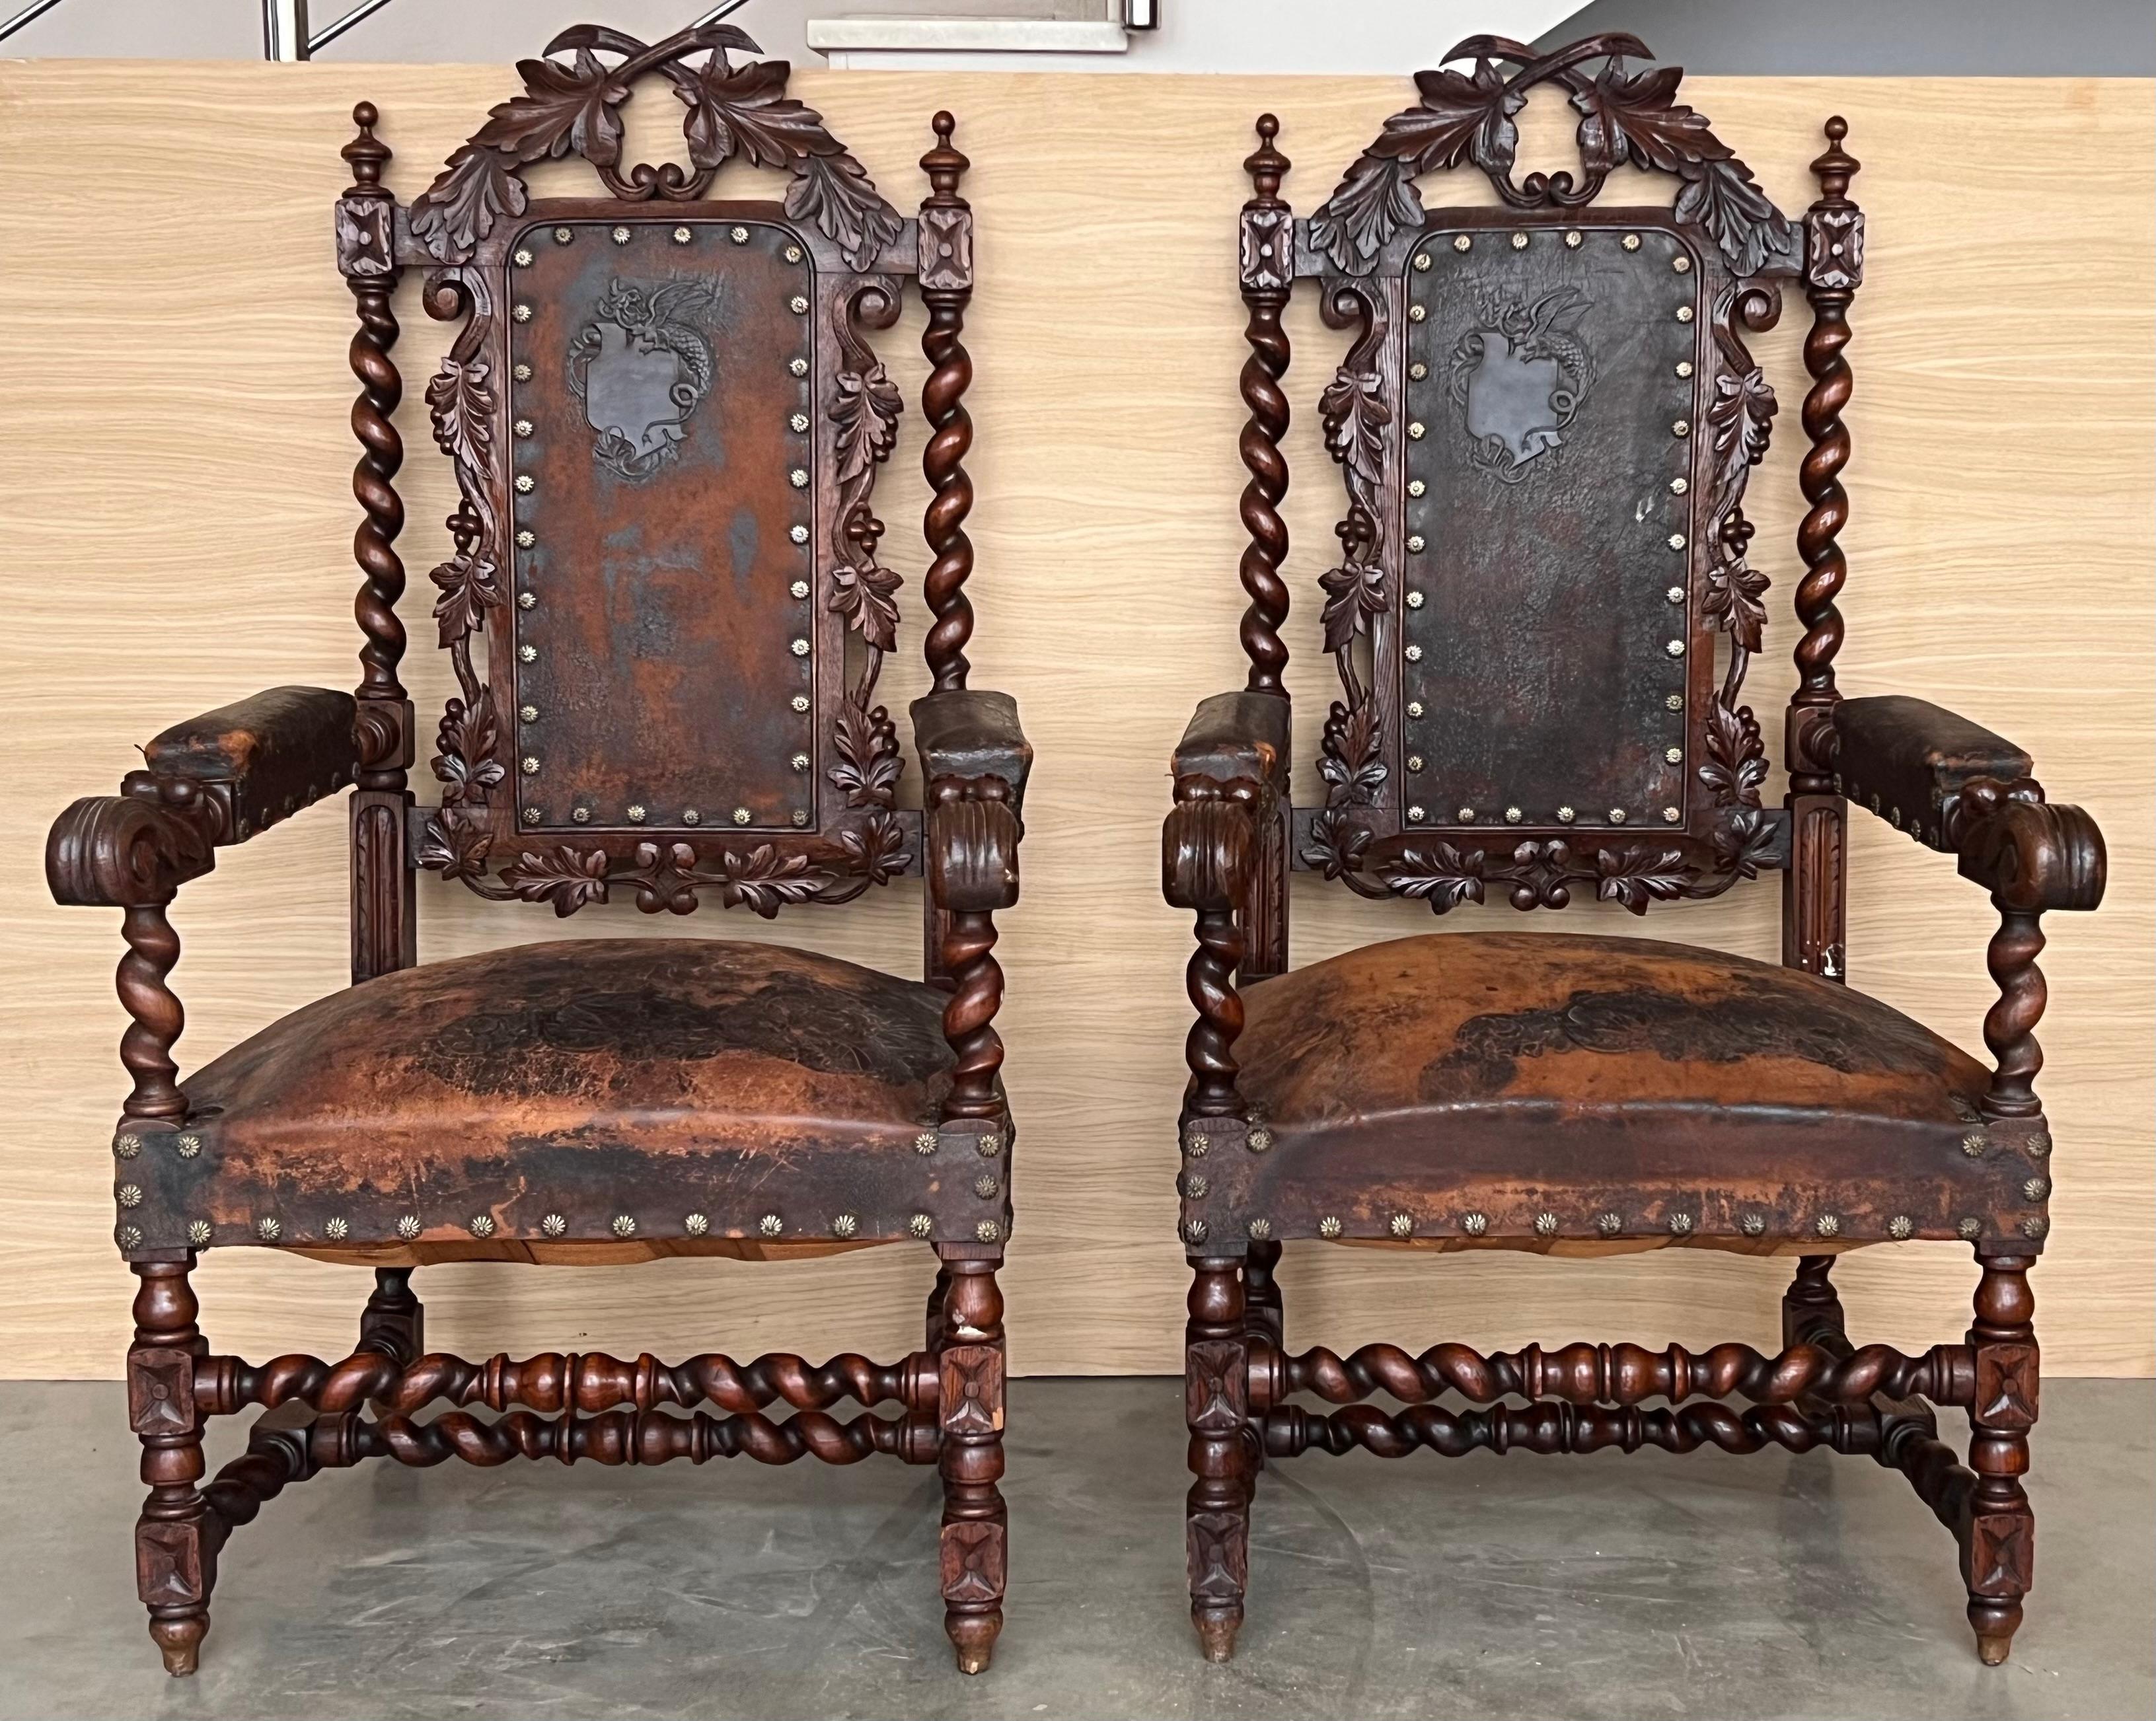 Pair of Spanish Colonial style armchairs, having carving leather seats and backs, brass nailheads and a beautiful patina throughout, turned legs and carved top,
18th century or earlier.

Measures: Height to the arm 28.34 in.